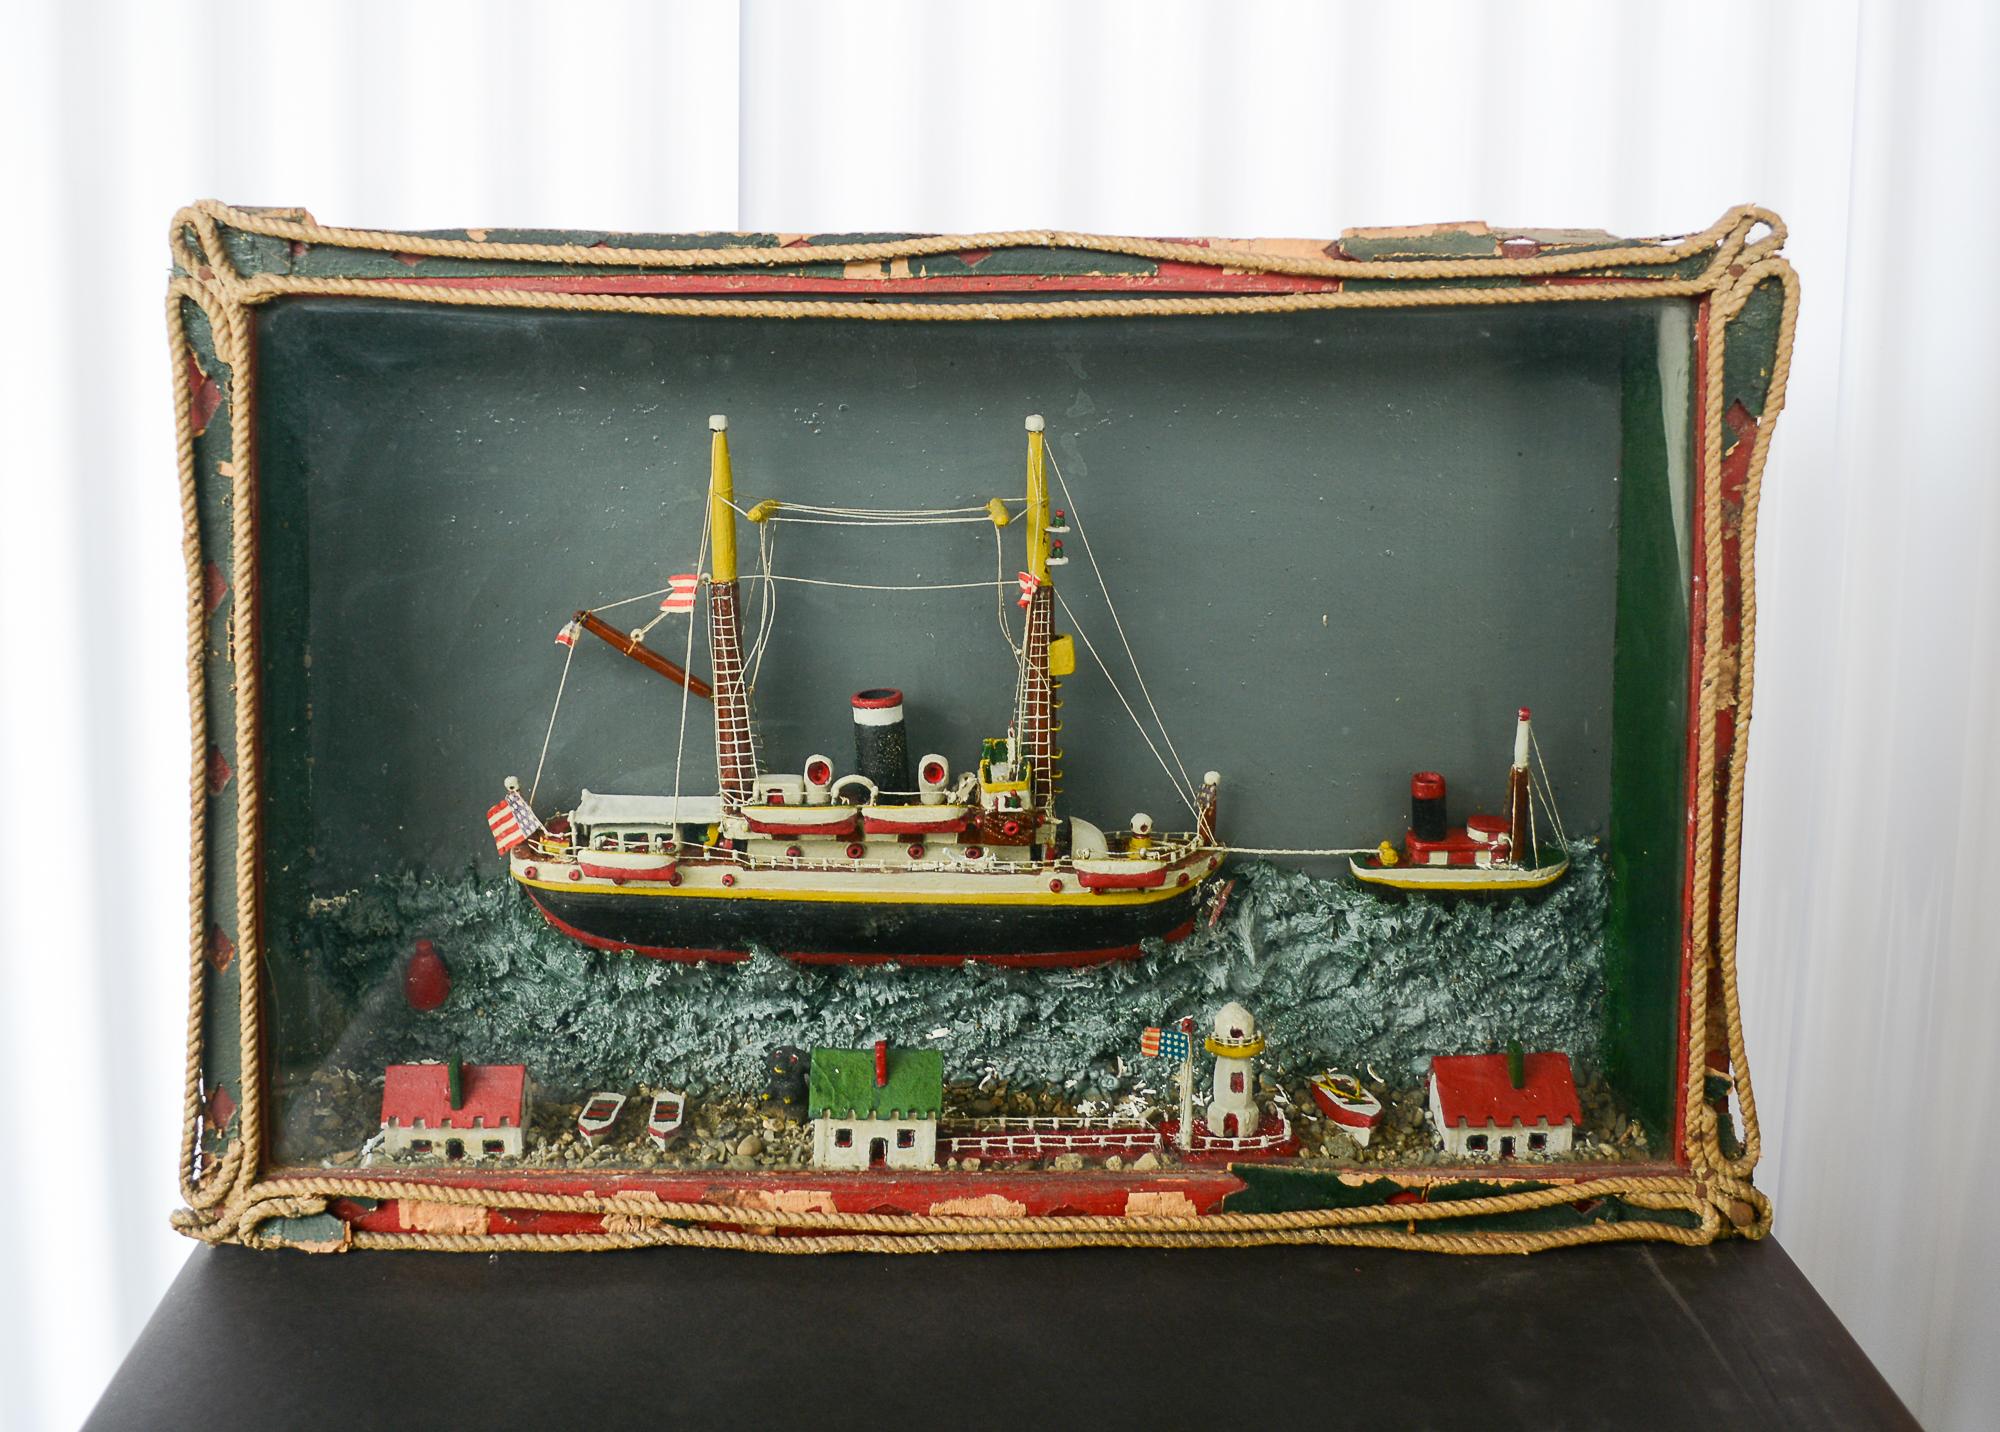 Folk art diorama of a ship being towed by a tug boat. At the bottom of the diorama is a representation of the shore with buildings and a lighthouse. The glass is earlier wavy glass and the back appears to be one solid wide board. The outside below